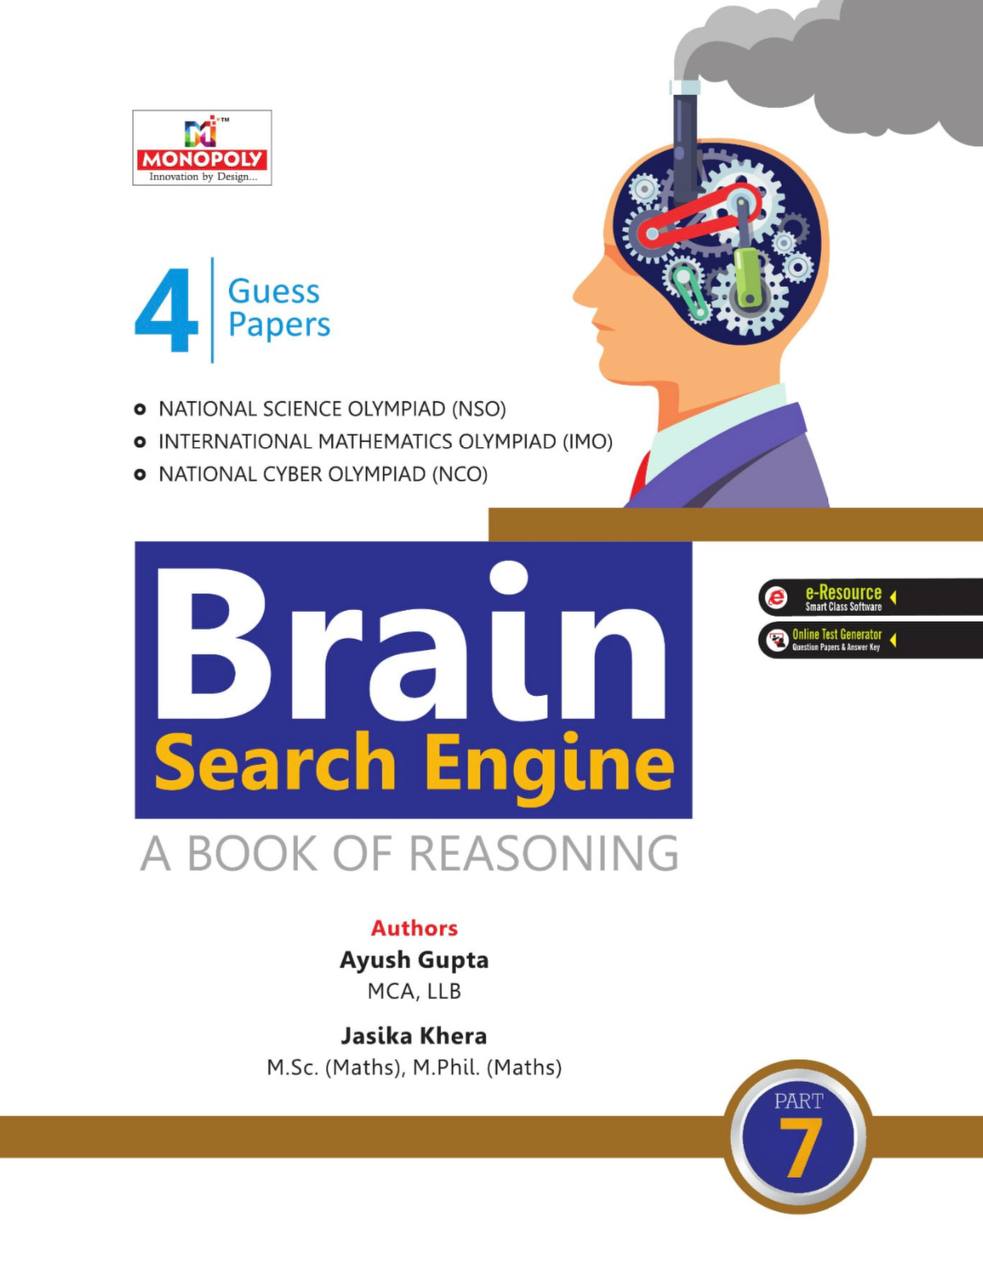 Brain Search Engine A Book of Reasoning 1 to 8